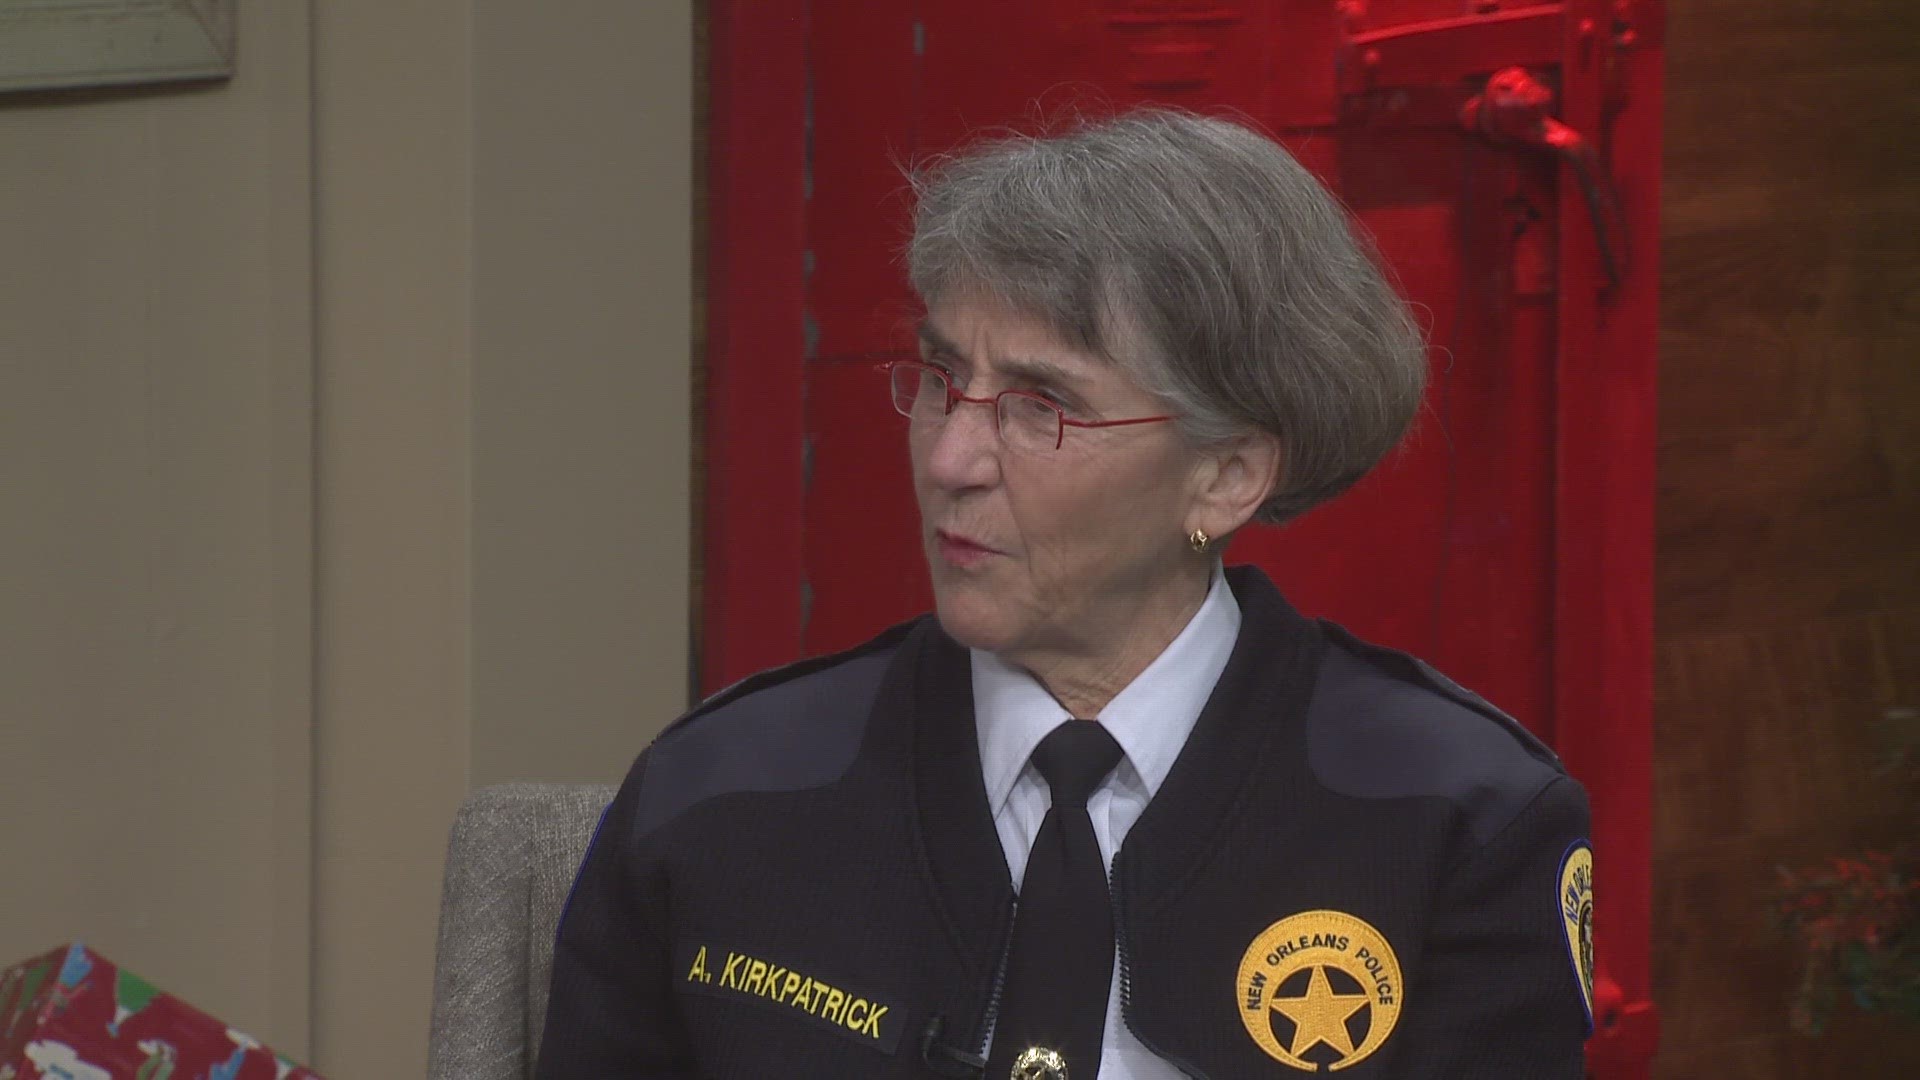 Darlene Cusanza, Crimestoppers CEO, and NOPD Superintendent Anne Kirkpatrick discuss new crime prevention efforts.